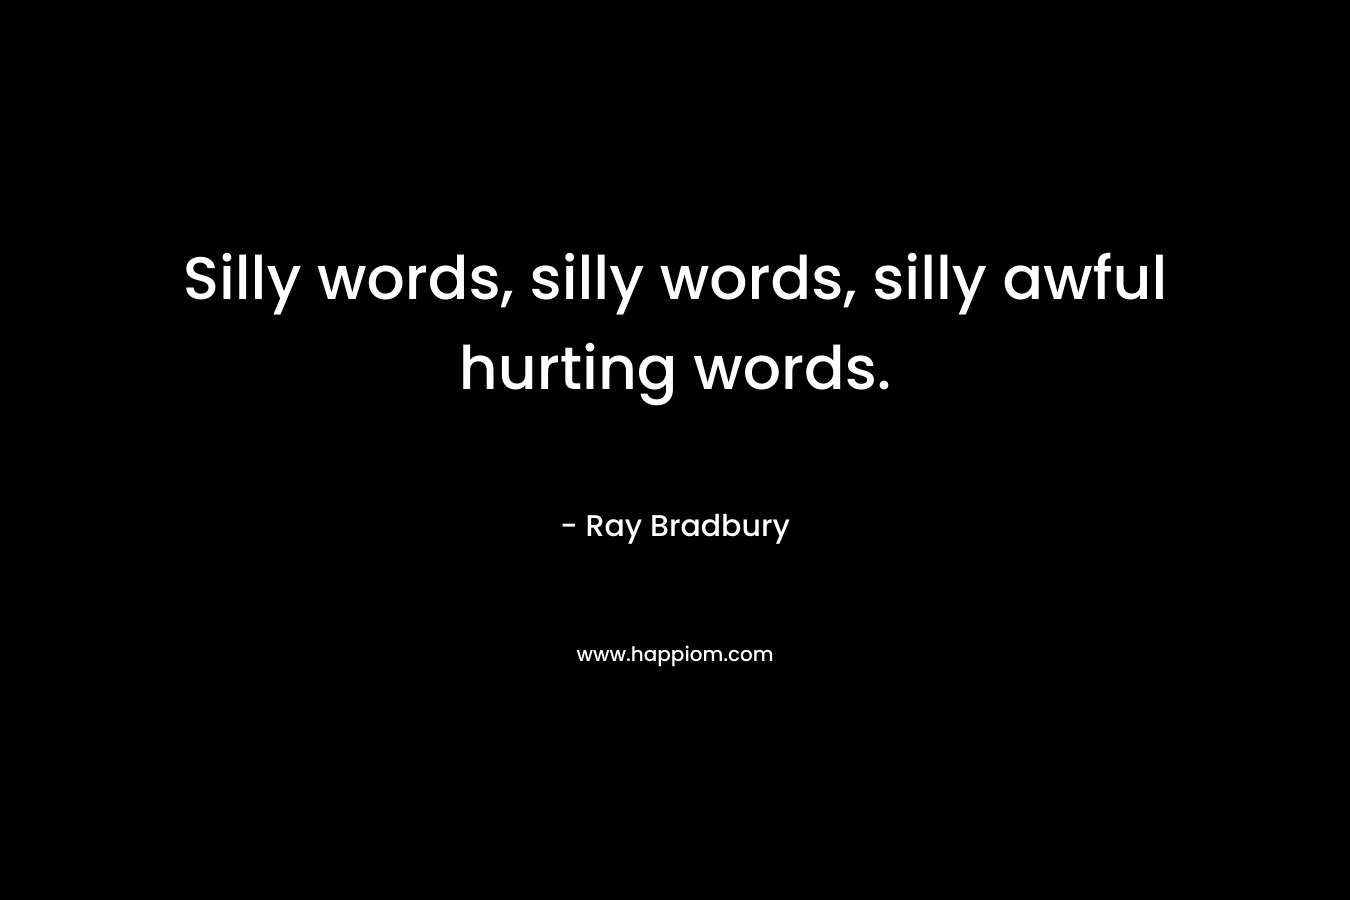 Silly words, silly words, silly awful hurting words.